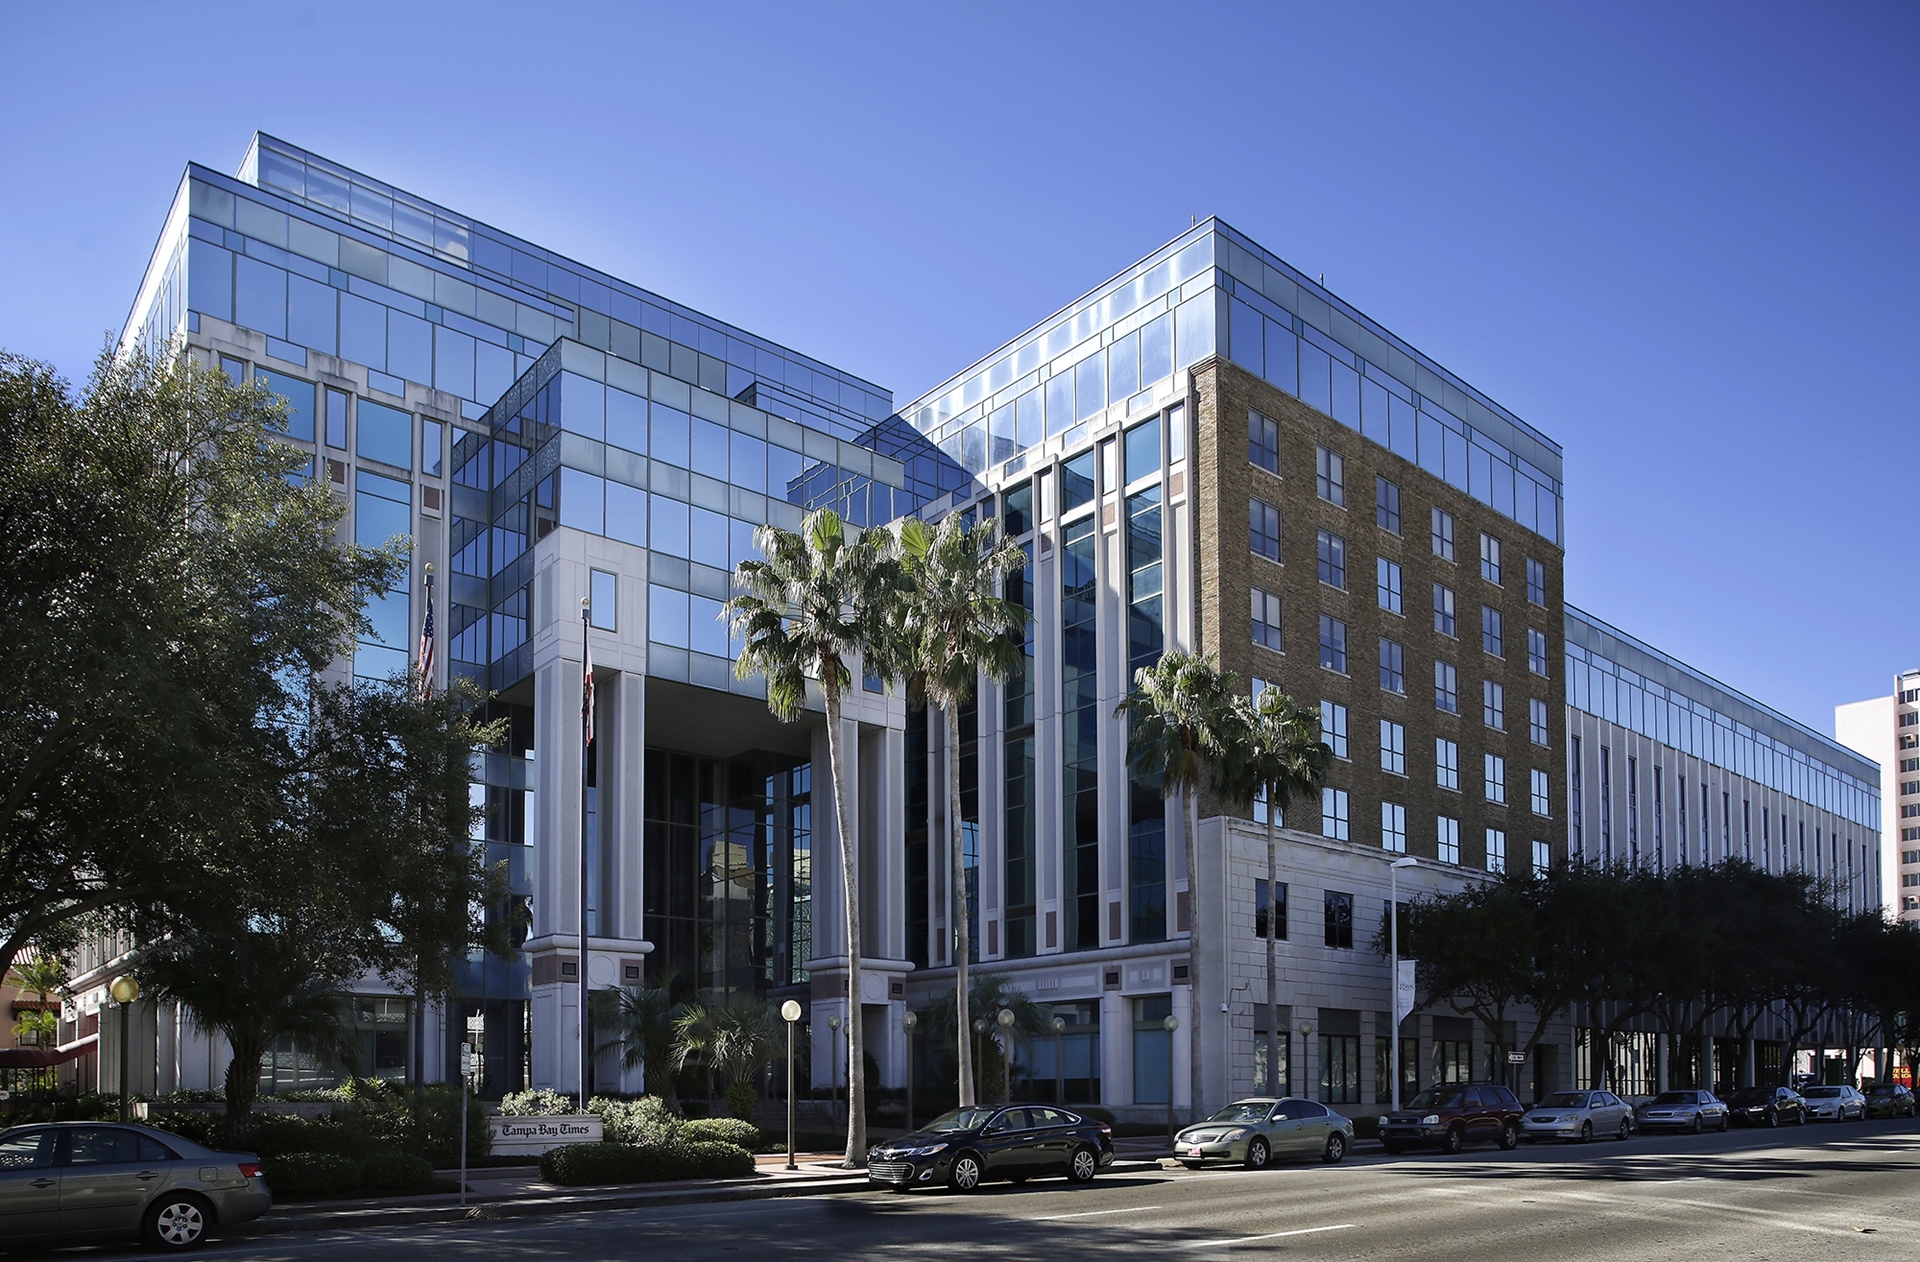 490 First Ave. South in downtown St. Petersburg was 46% occupied when Convergent and partner Denholtz Associates bought it. When it sold late last year, it was more than 90% committed.